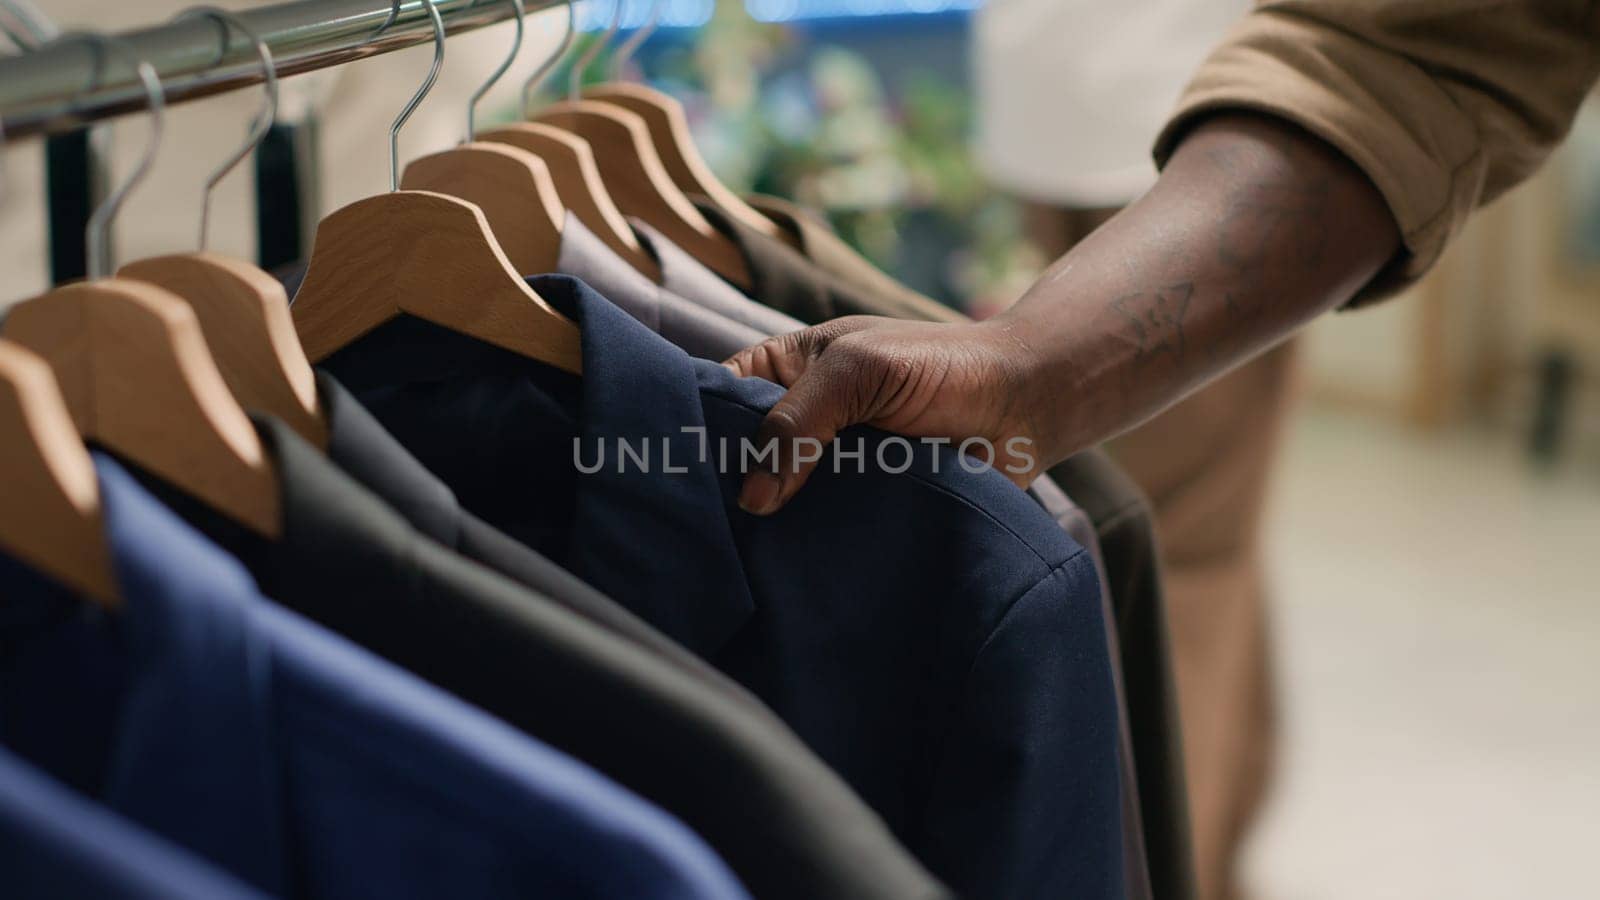 Customer in thrift shop browsing through clothes on racks to find perfect outfit. Close up shot of client in second hand clothing store doing shopping, wanting to purchase elegant blazer